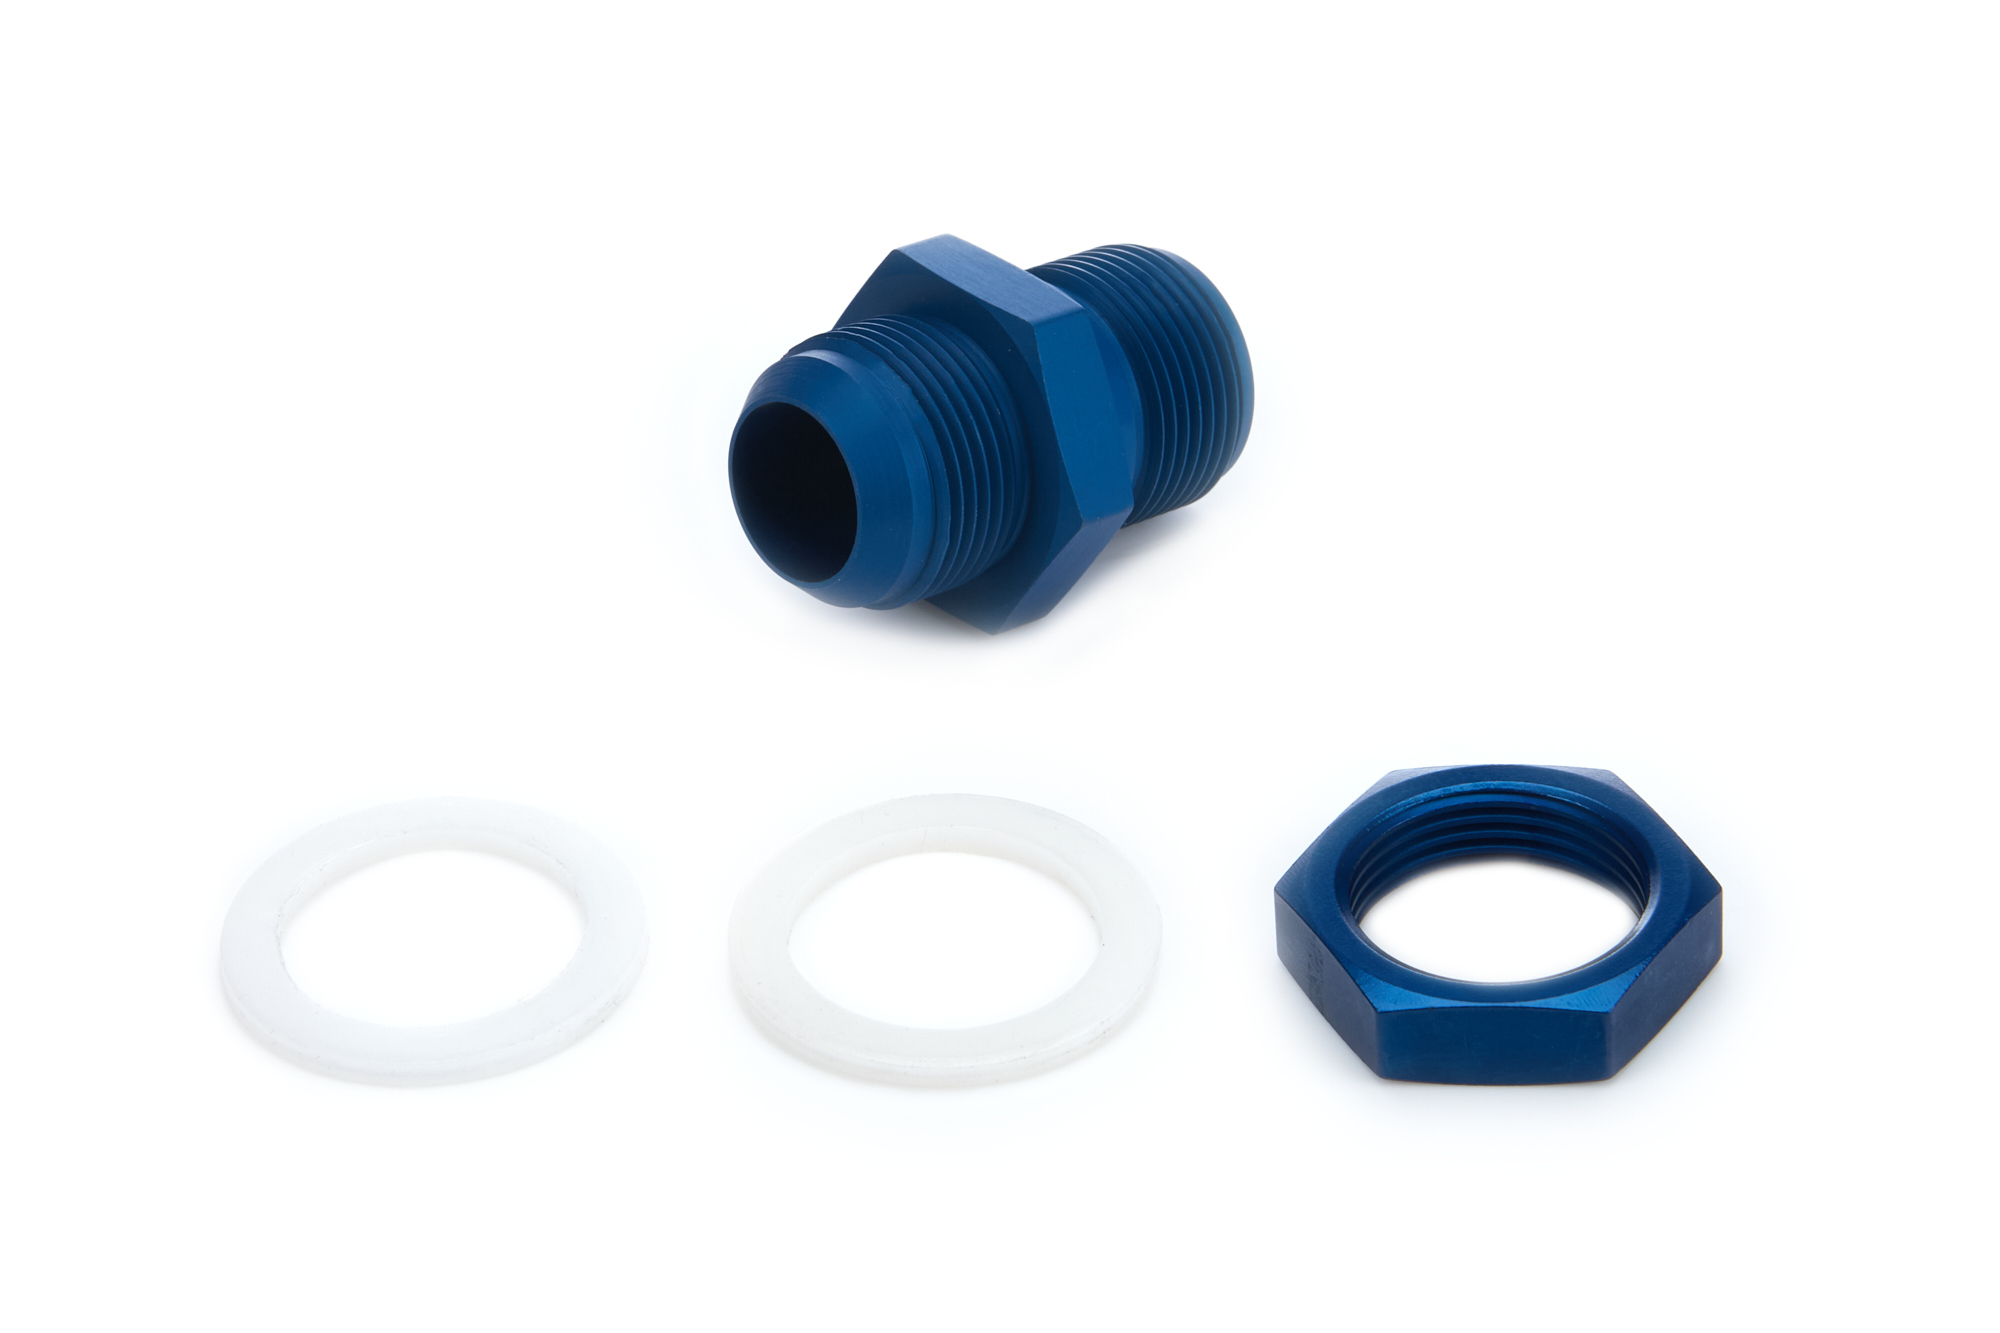 JAZ Products 832-116-11 Fitting, Bulkhead, Straight, 16 AN Male to 16 AN Male Bulkhead, PTFE Gaskets Included, Aluminum, Blue Anodized, JAZ Fast Flow Fuel Cells, Each